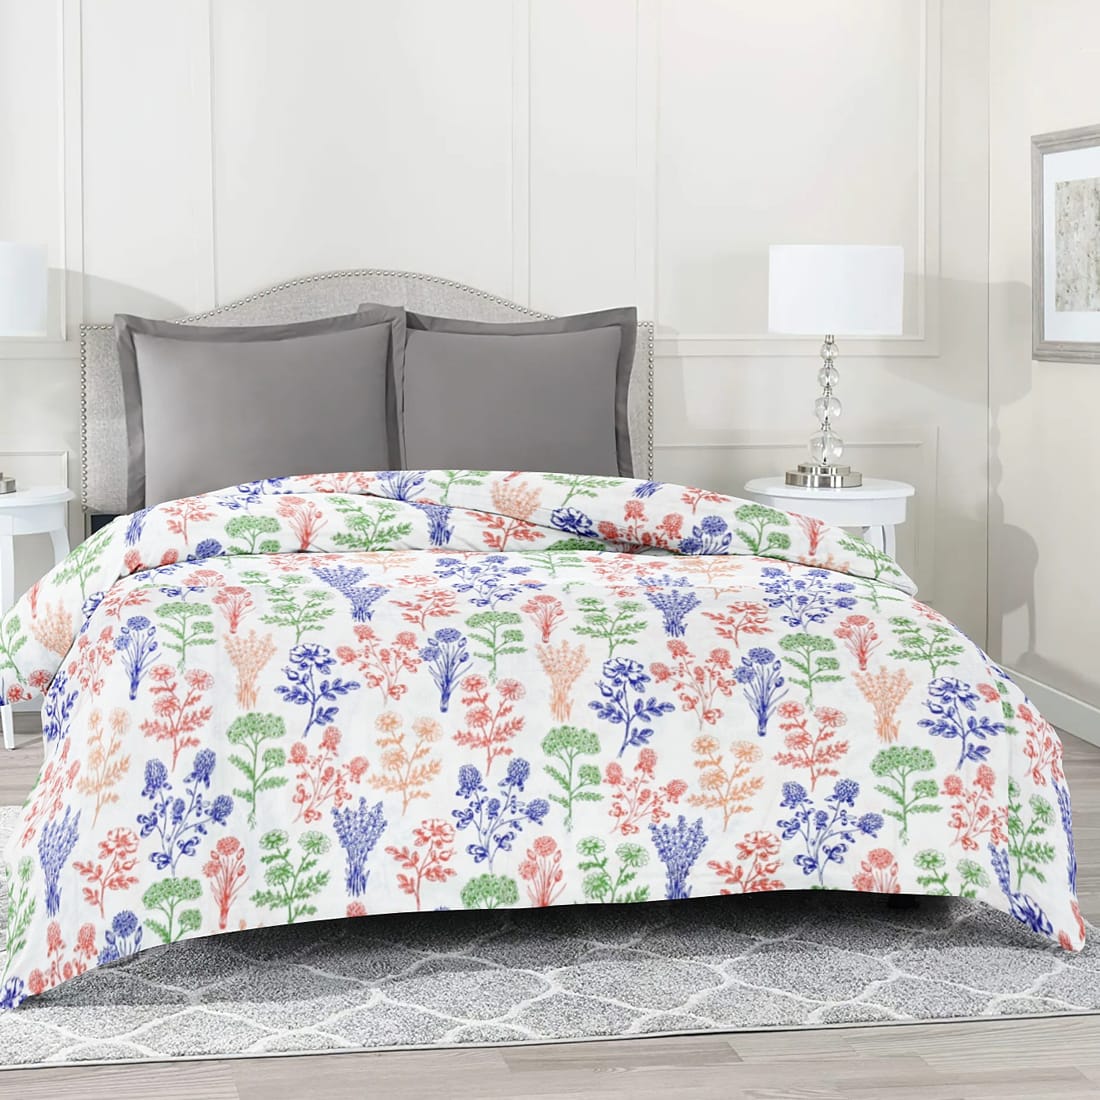 Comfy 250 TC Rust Floral Print Cotton Duvet Cover online in India